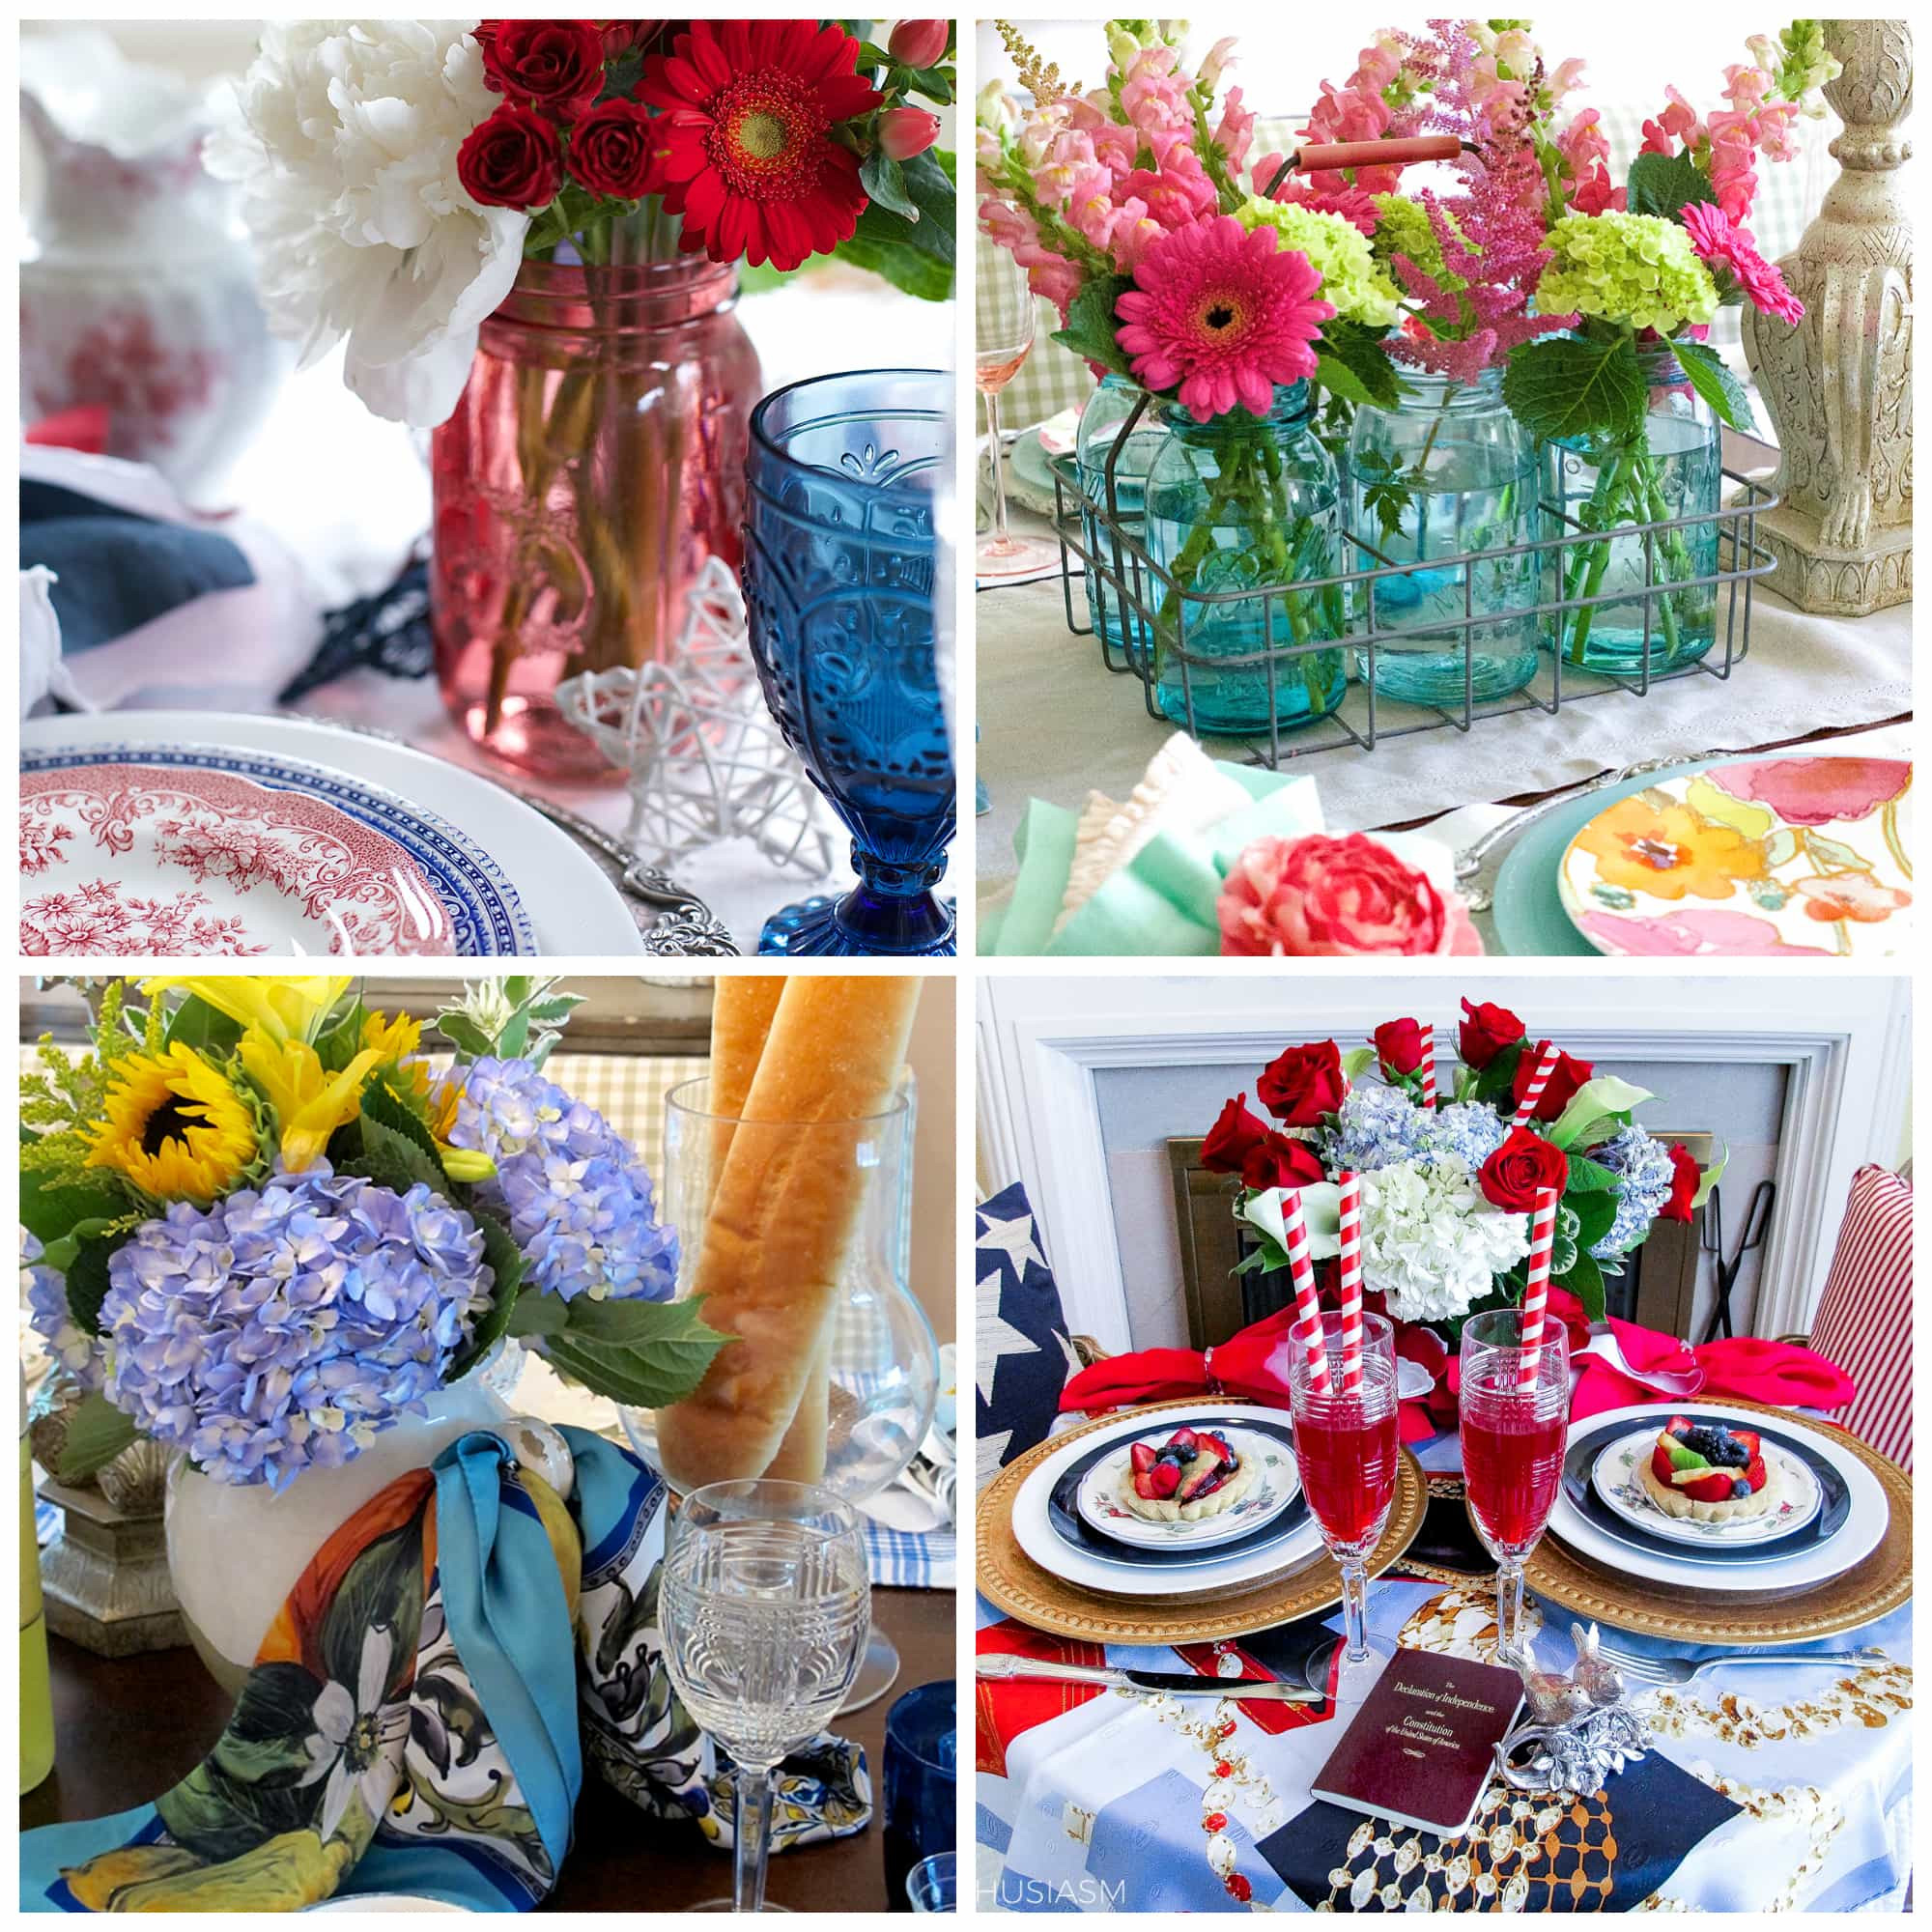 Summer Party Decoration Ideas
 Summer Party Decorations 6 Colorful Tablescape Ideas